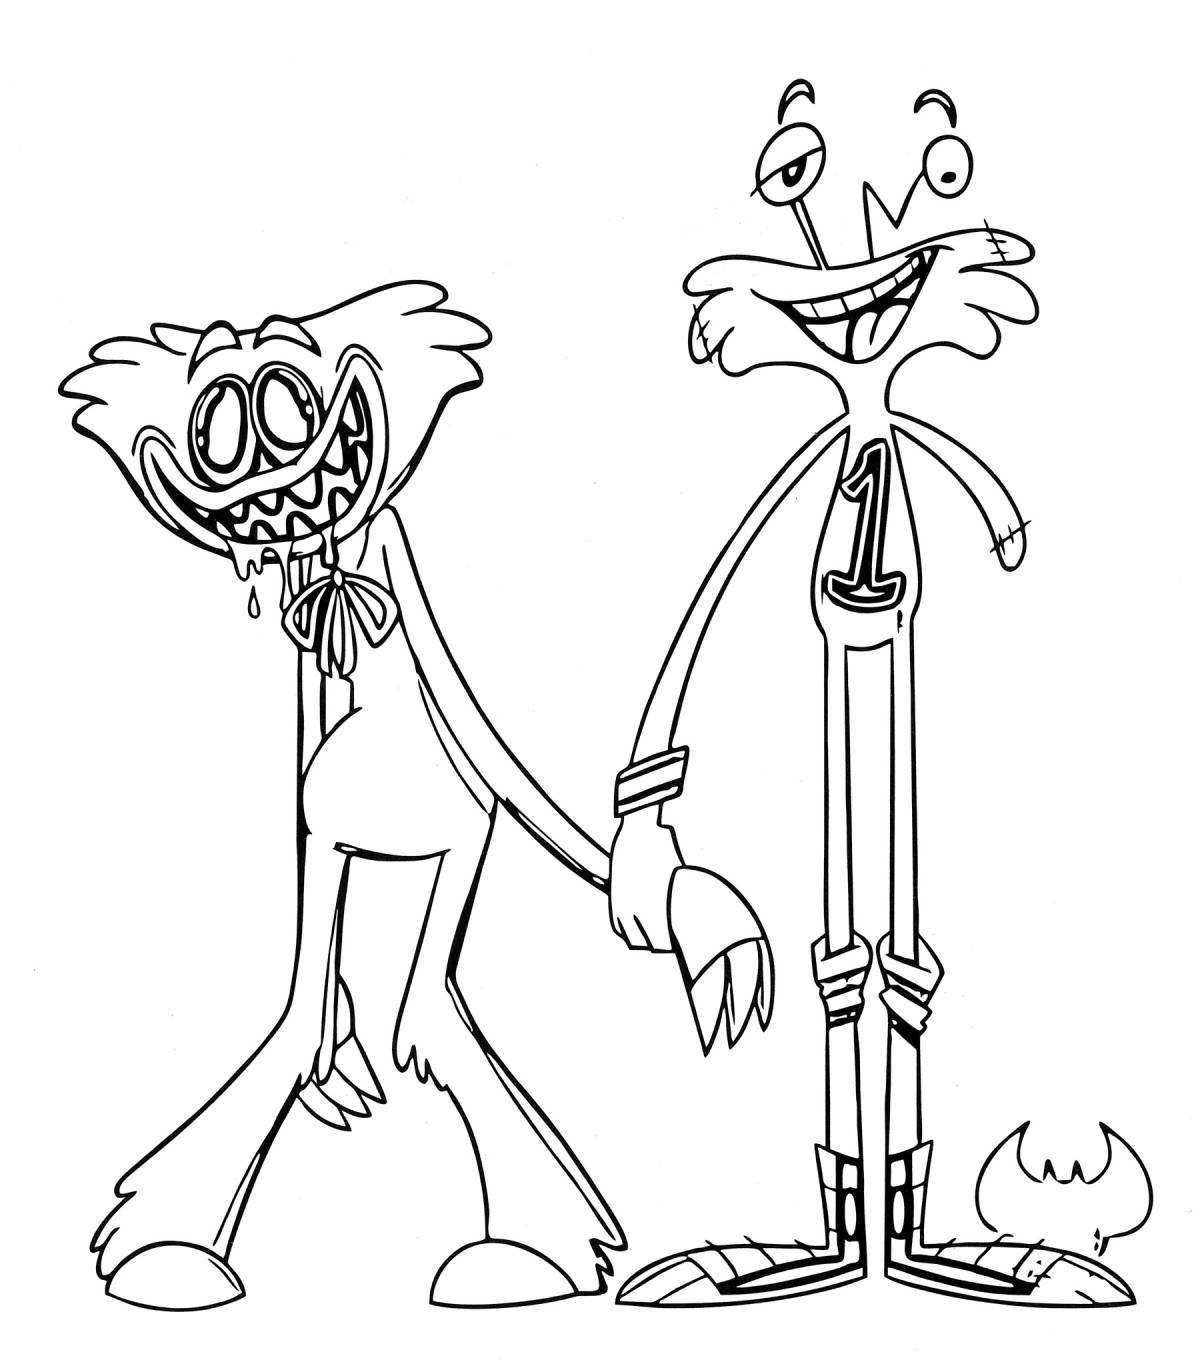 Glowing coloring pages family long legs